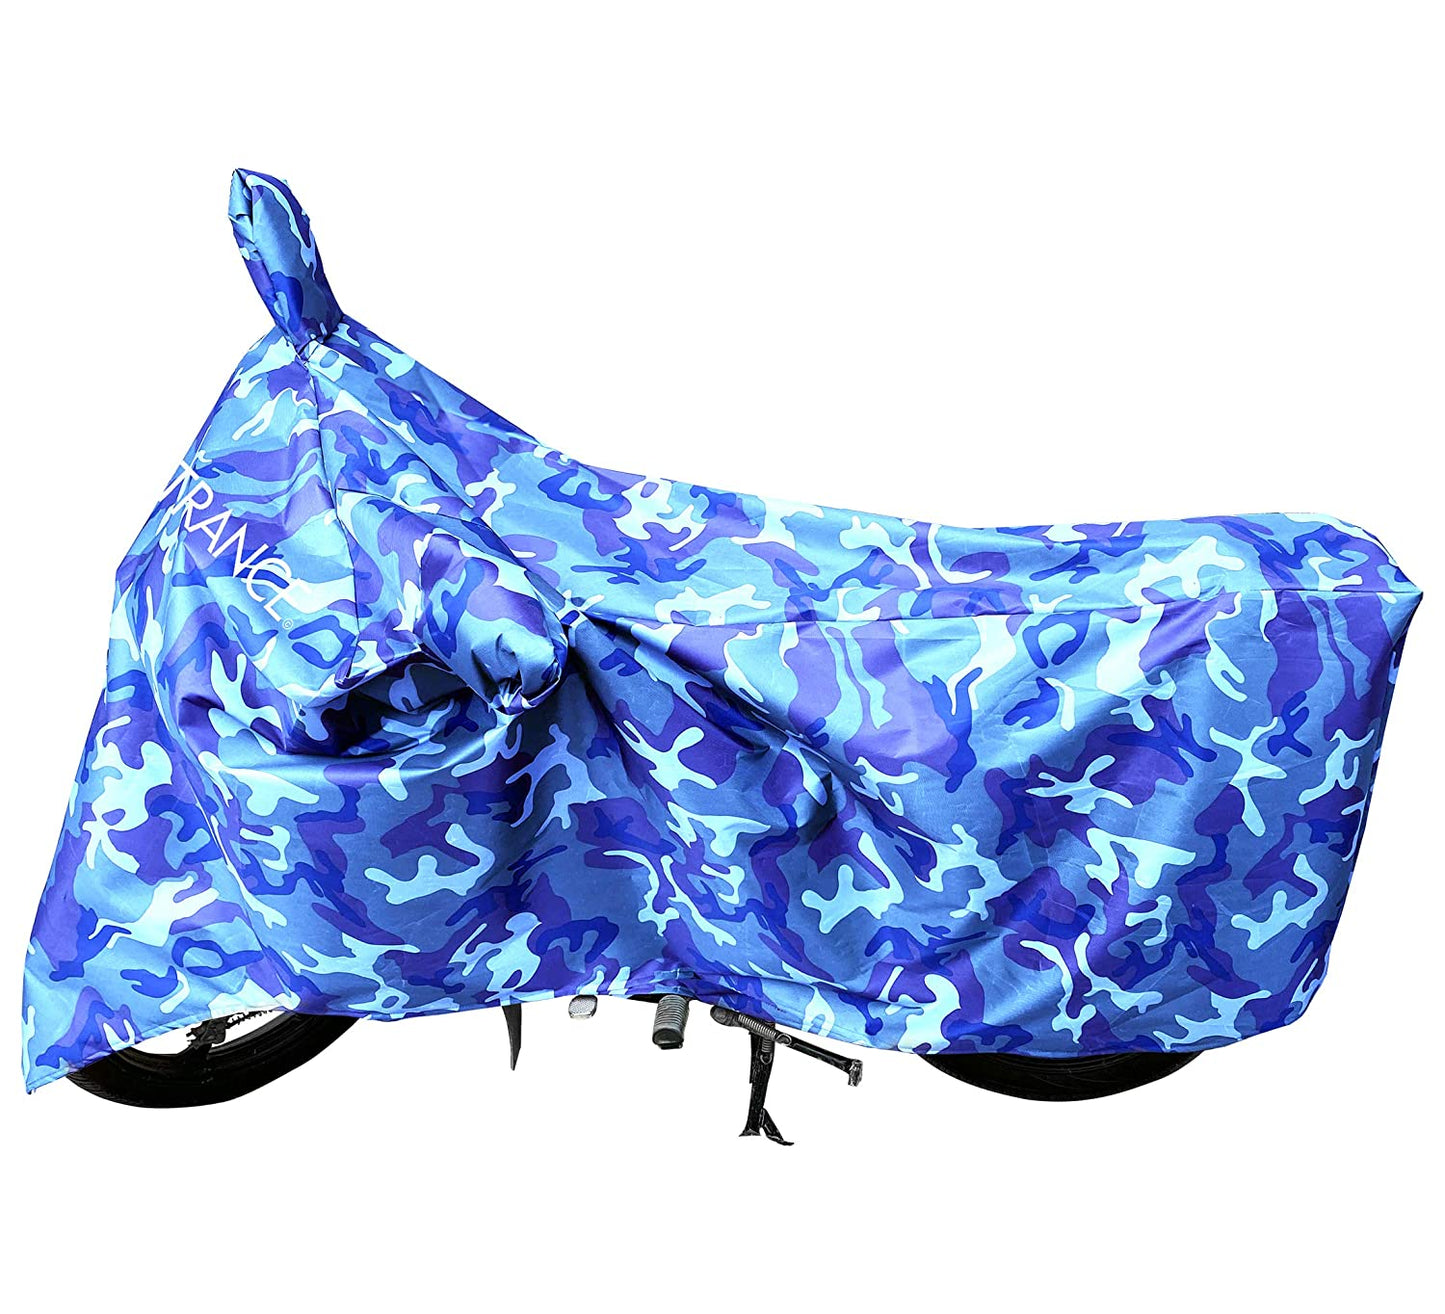 MotoTrance Jungle Bike Body Covers For Suzuki Intruder M1800R - Interlock-Stitched Waterproof and Heat Resistant with Mirror Pockets